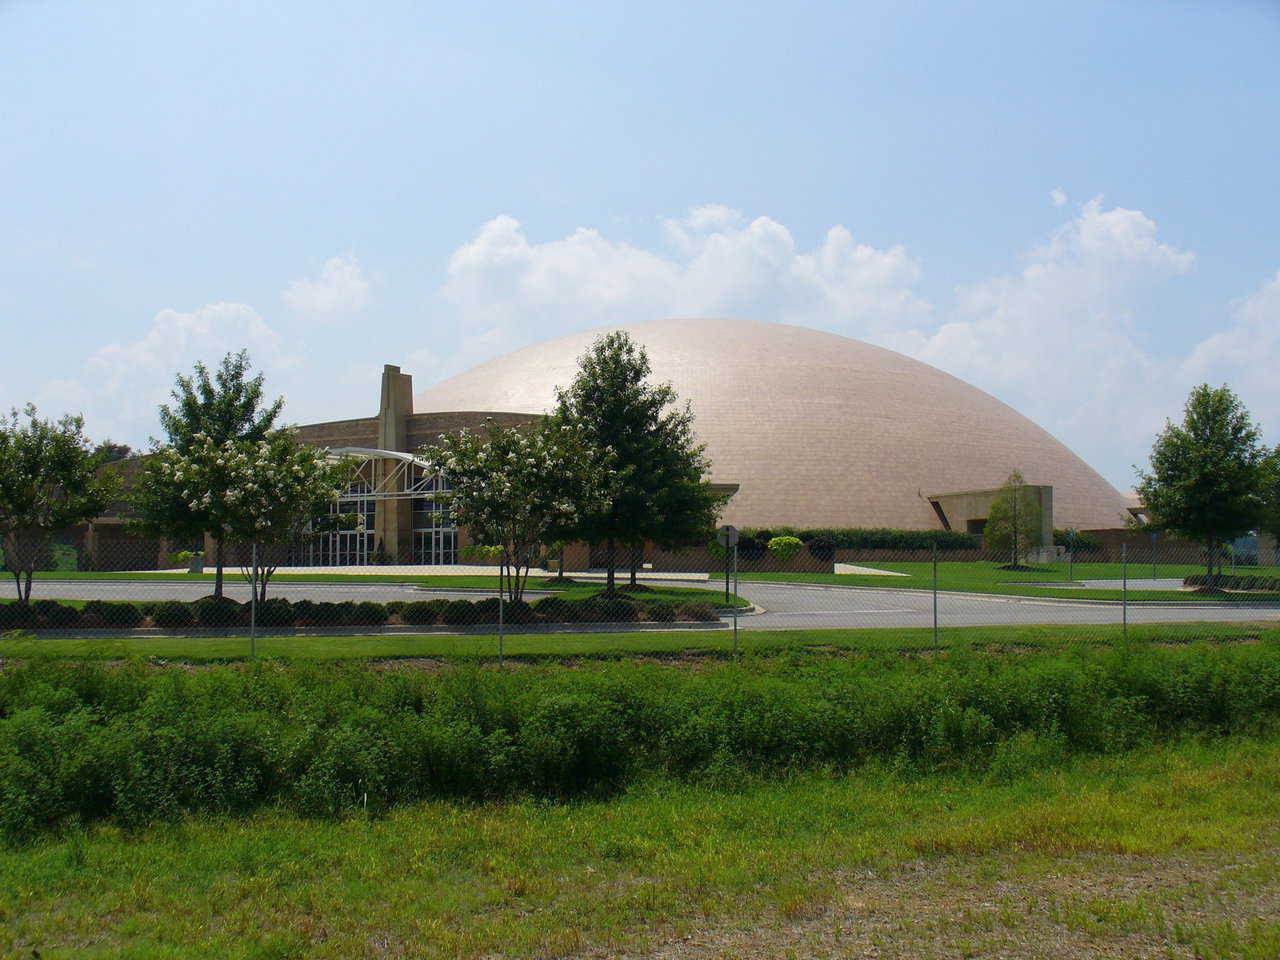 Faith Chapel — Faith Chapel Christian Center, a mega-church complex of six Monolithic Domes. Its sanctuary has a diameter of 280 feet, a height of 72 feet, and an interior of 61,575 square feet with seating for 3000, classrooms and offices.